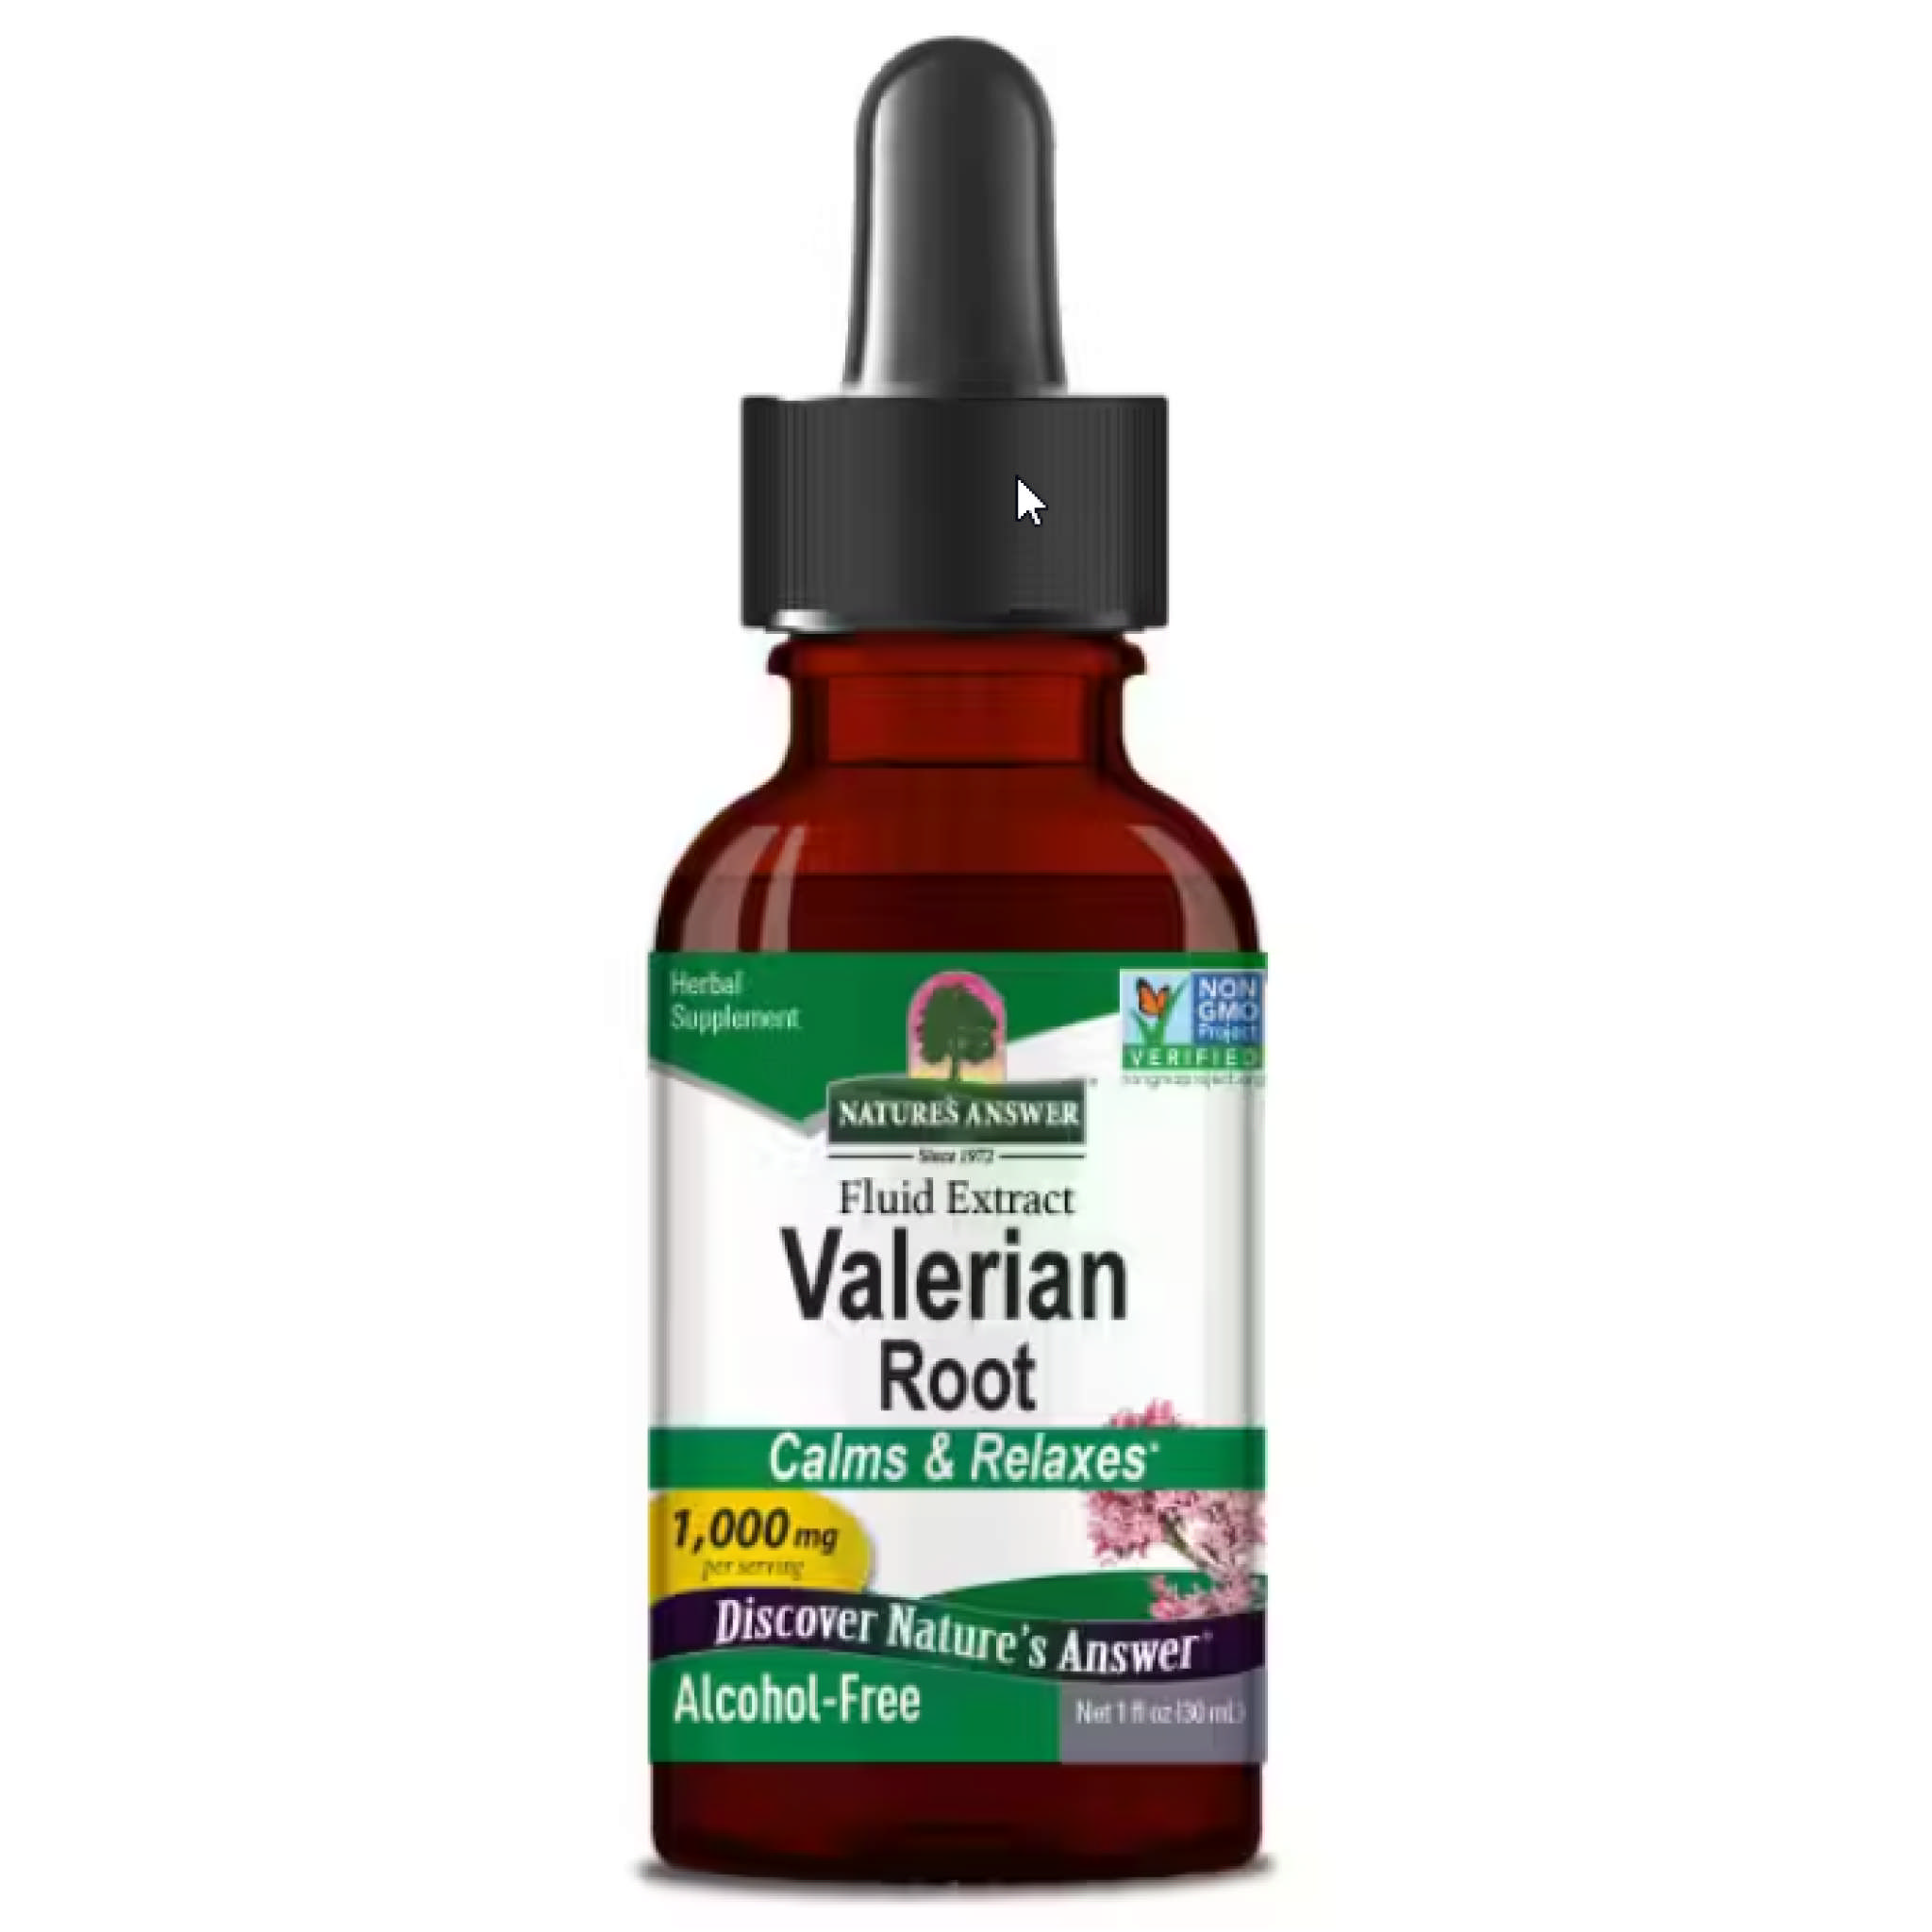 Natures Answer - Valerian Root A/F